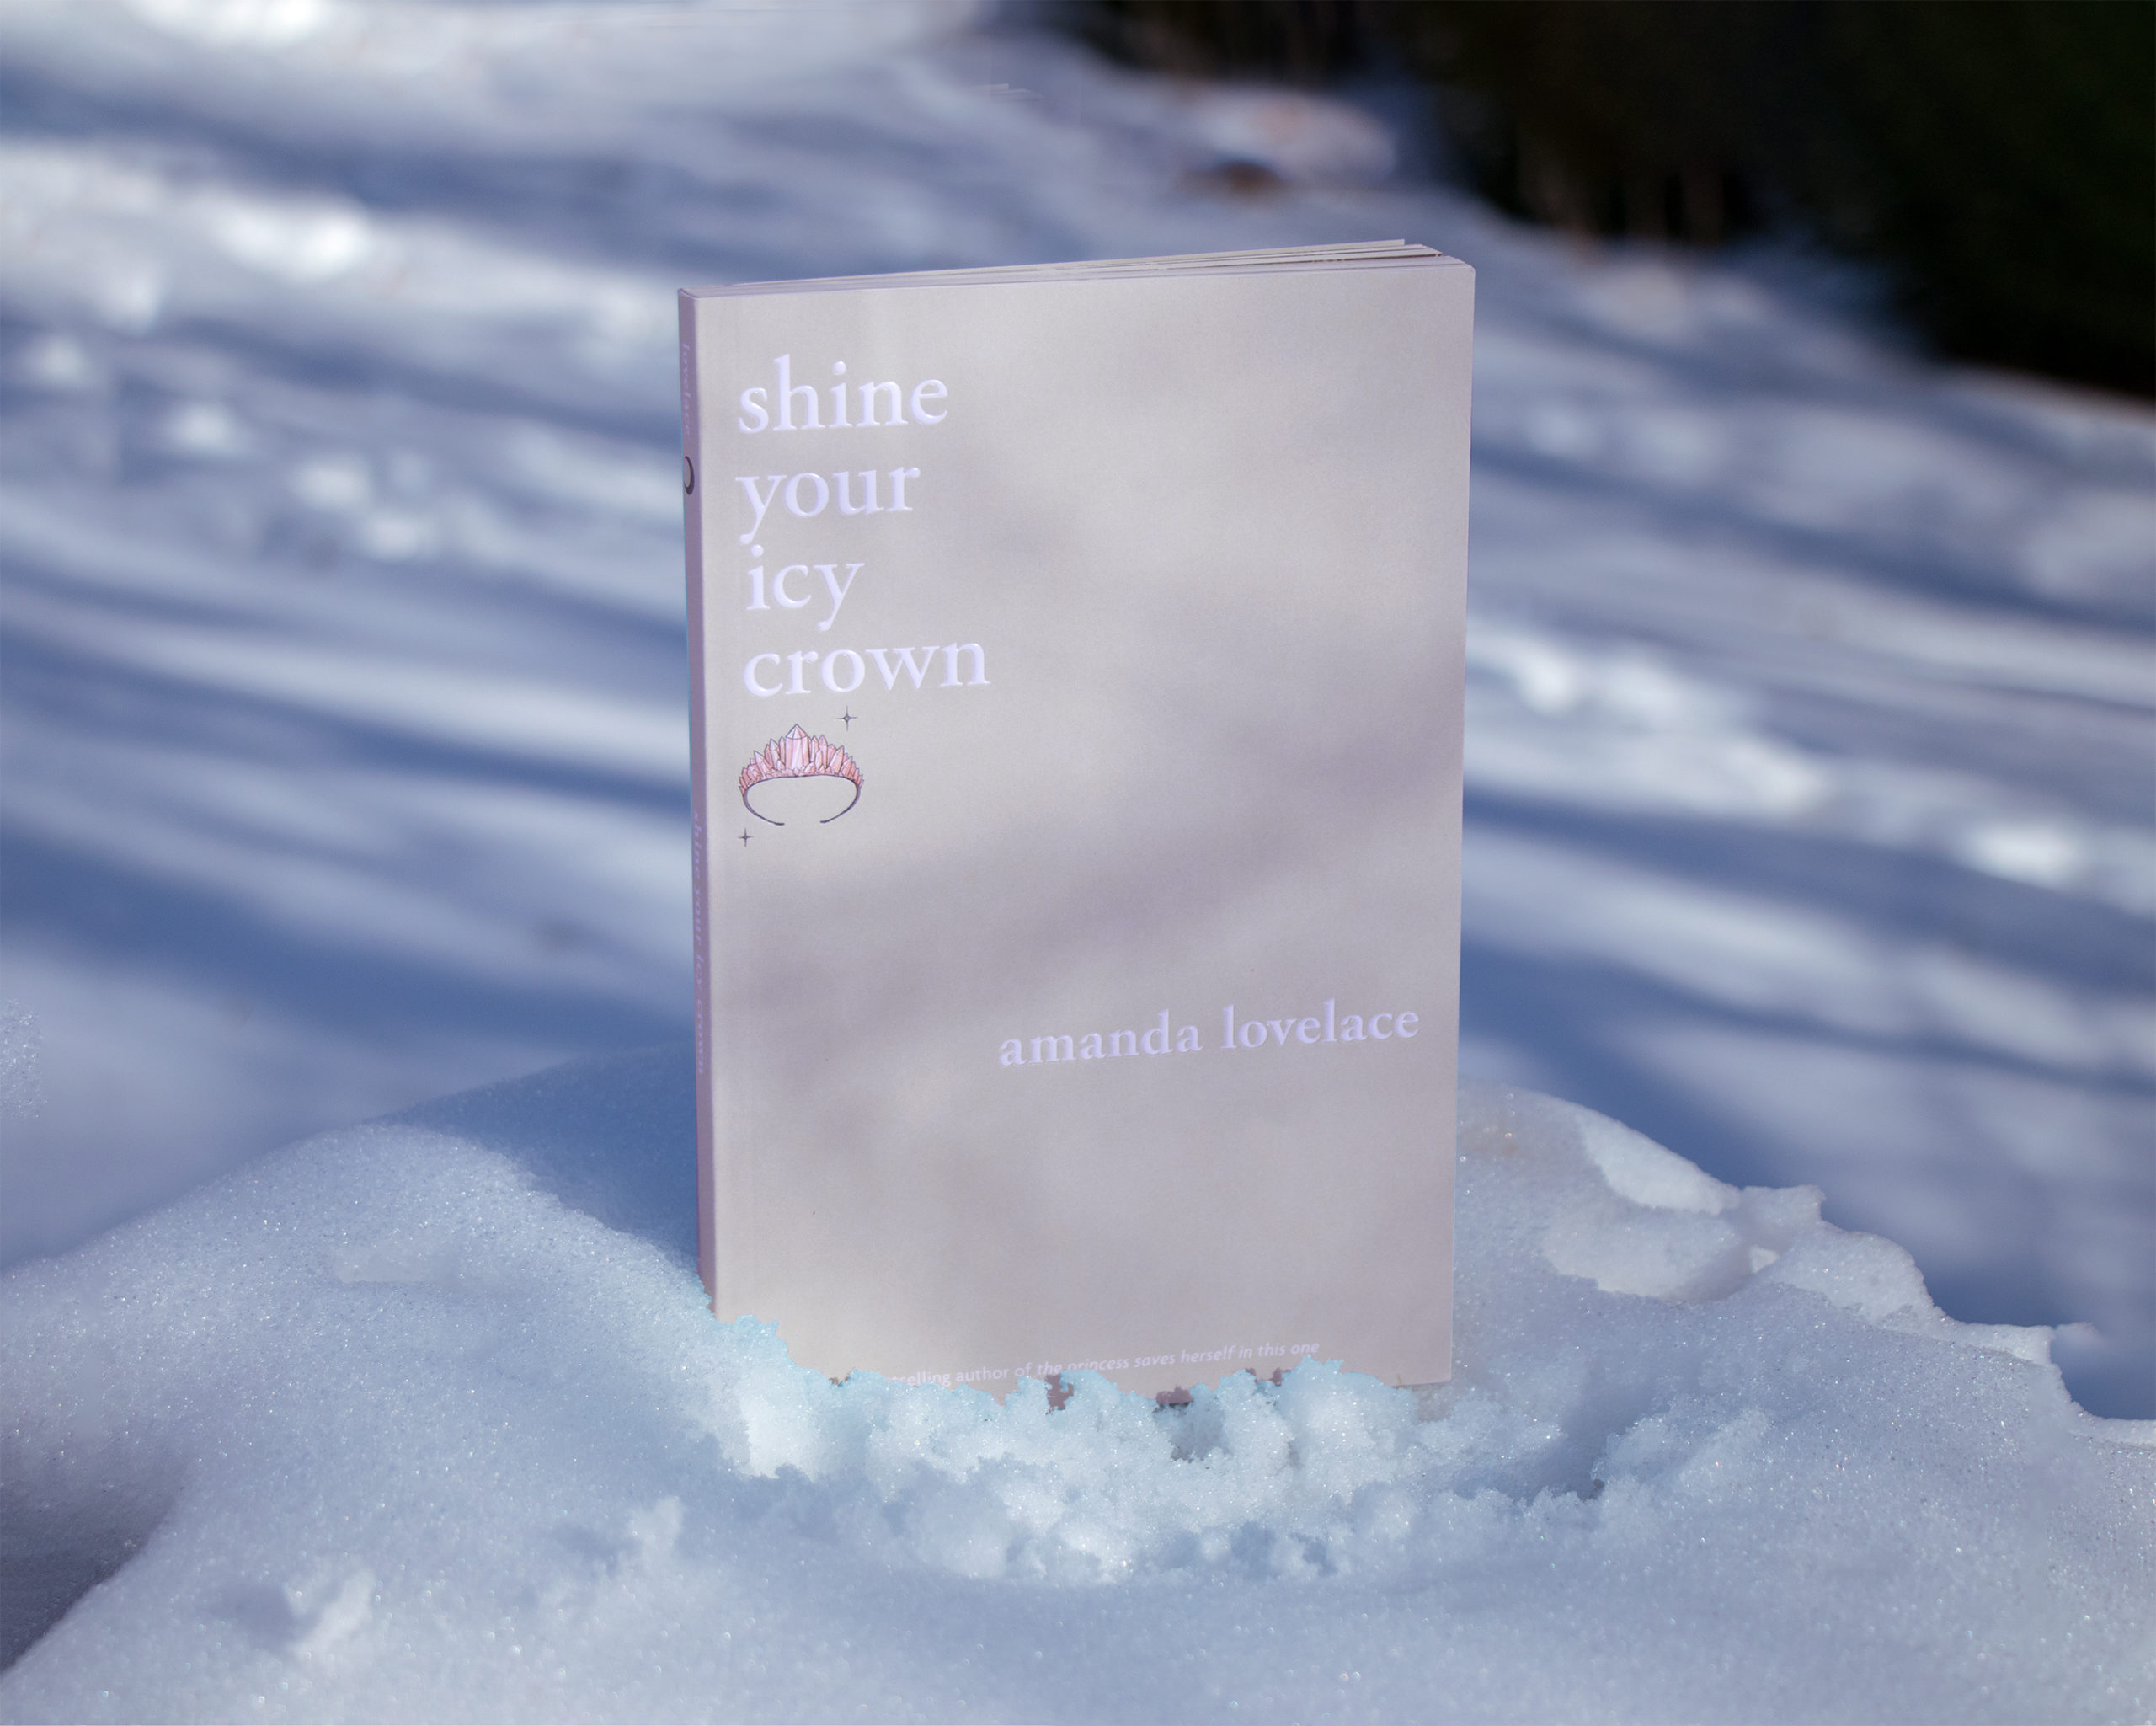 Shine Your Icy Crown by Amanda Lovelace